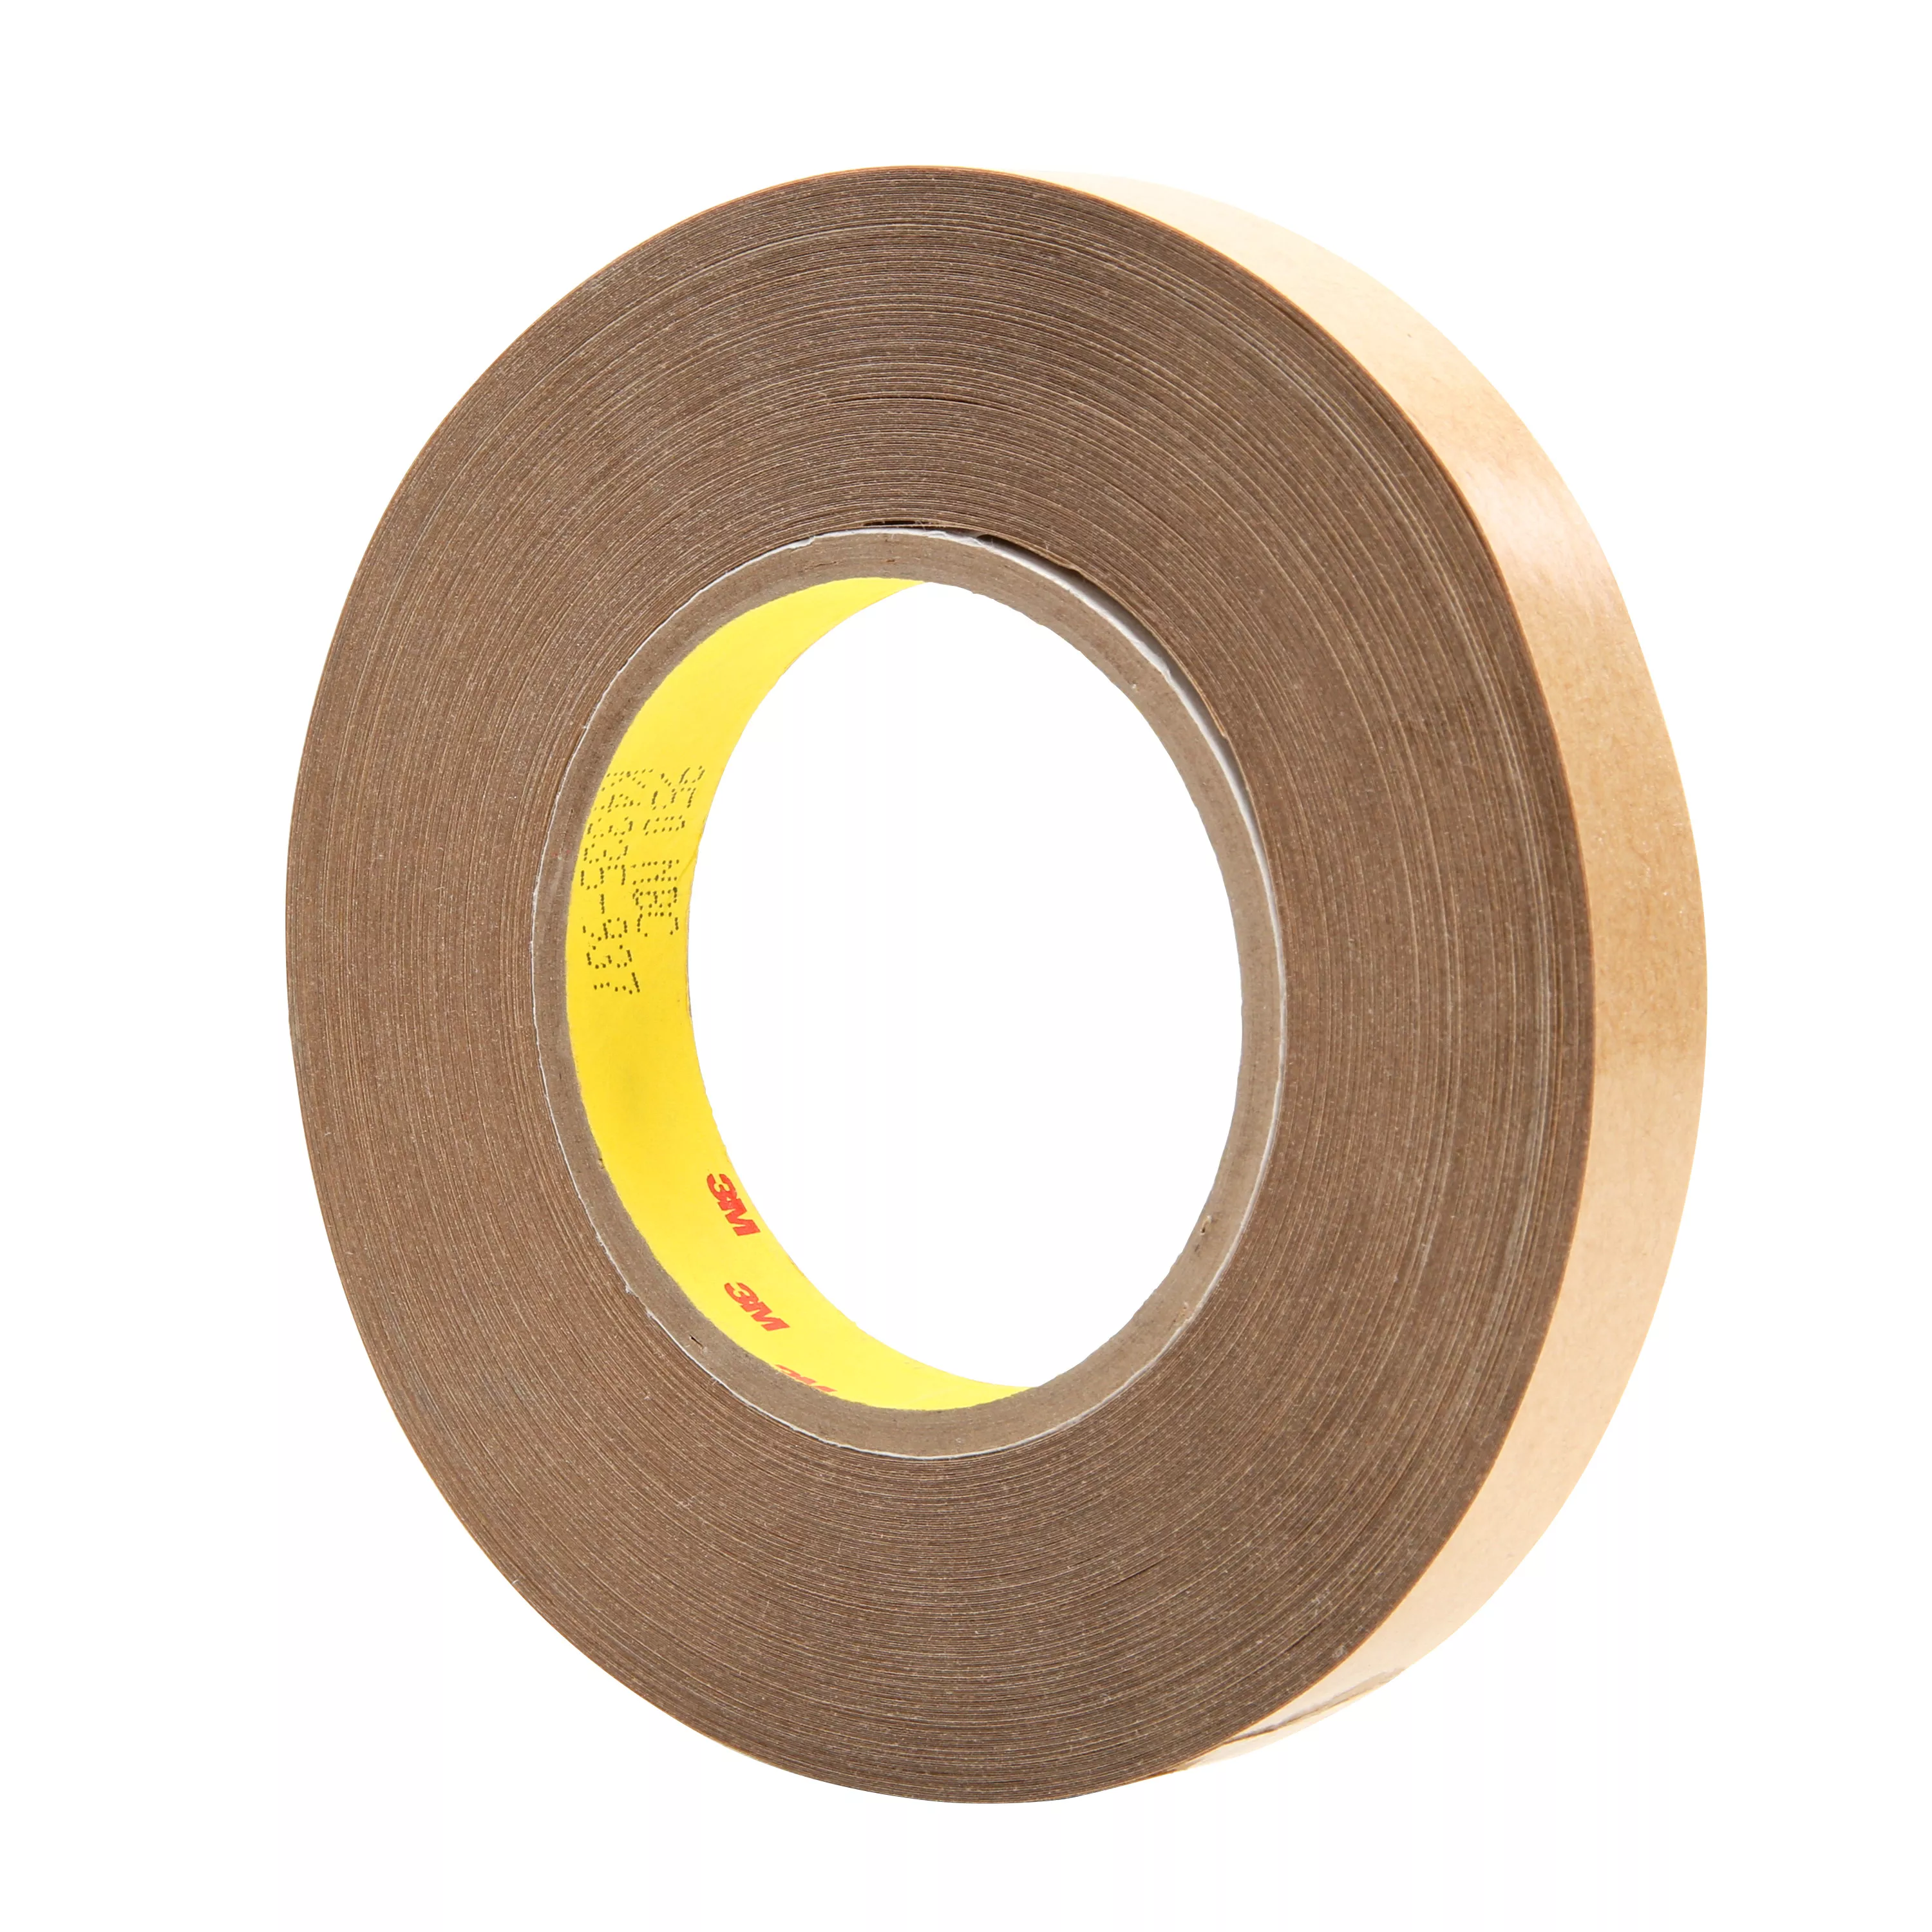 Product Number 950 | 3M™ Adhesive Transfer Tape 950